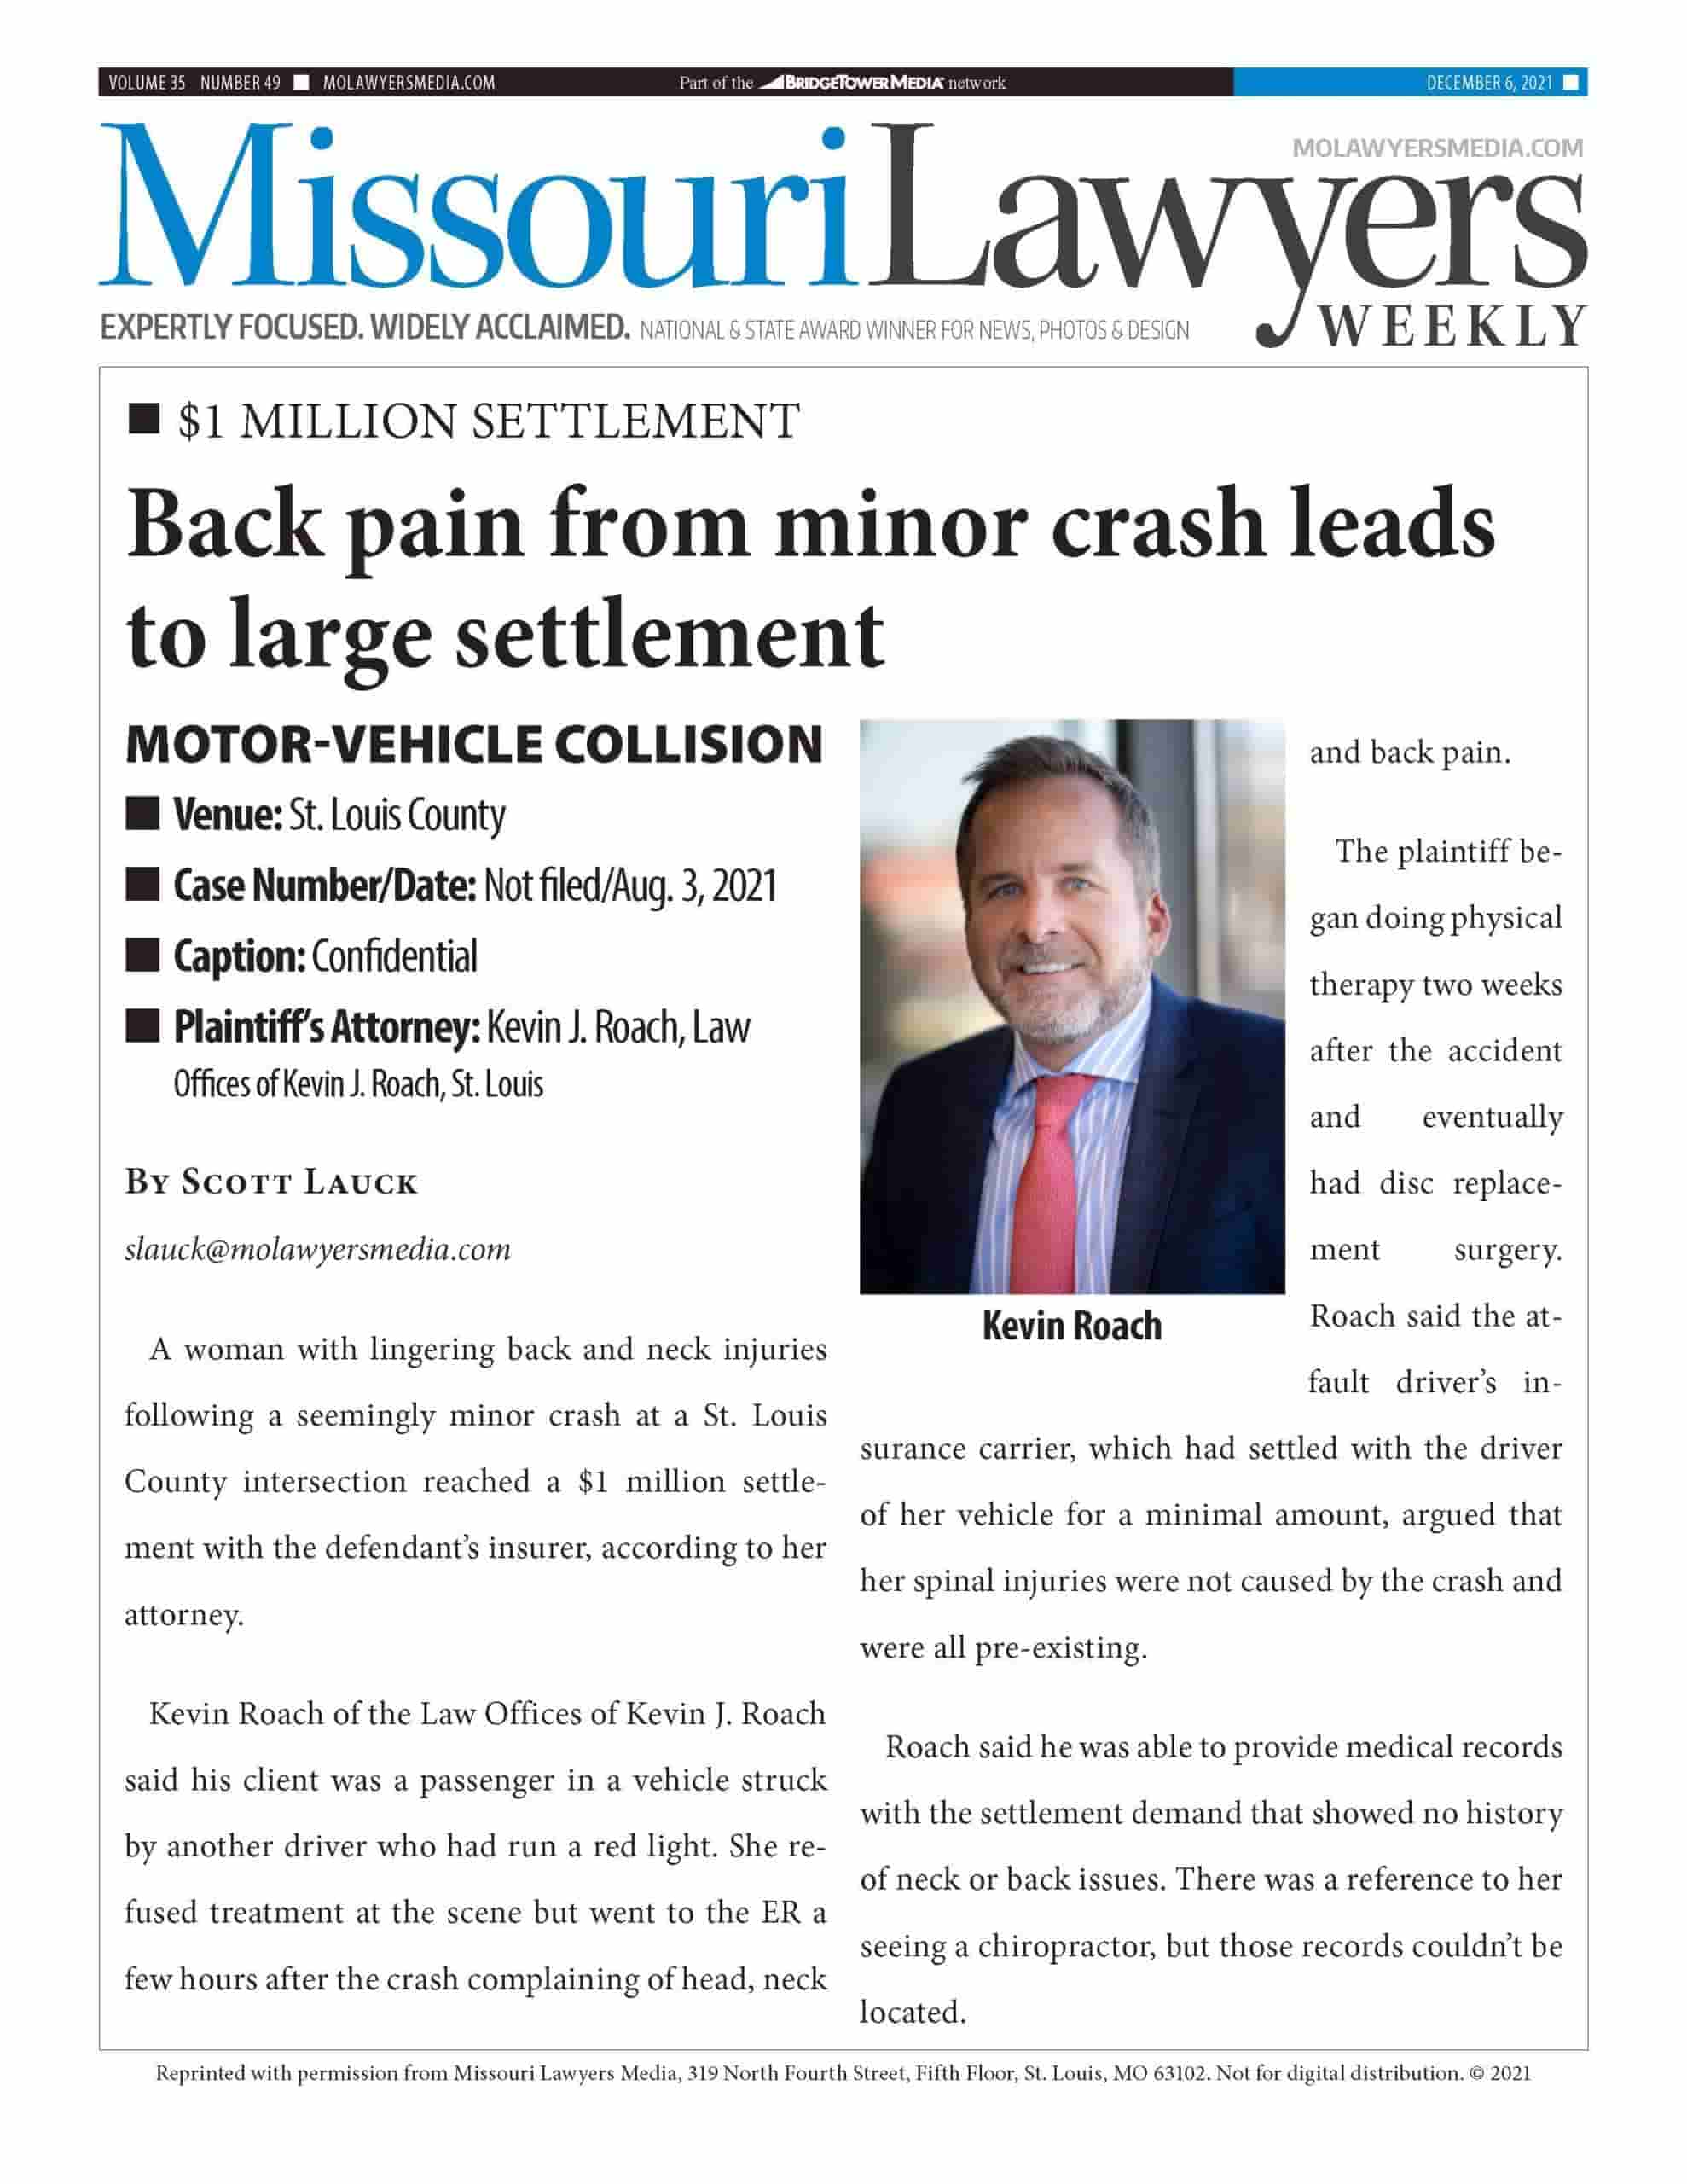 Back pain from minor crash leads to large settlement